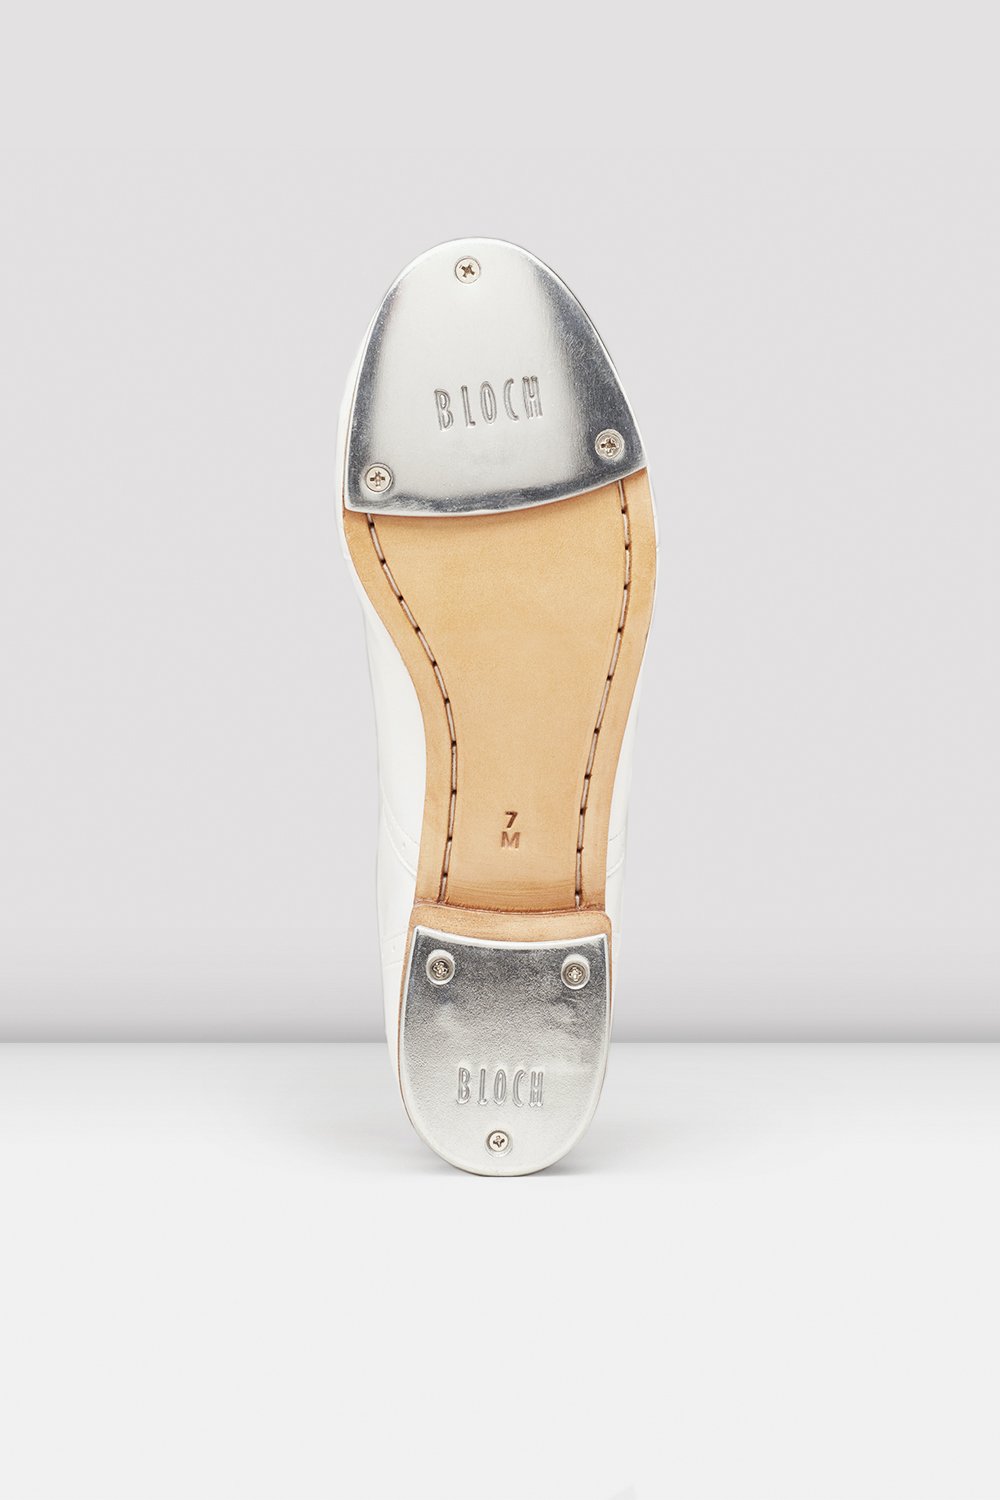 Bloch US | The Home of Dance Shoes 